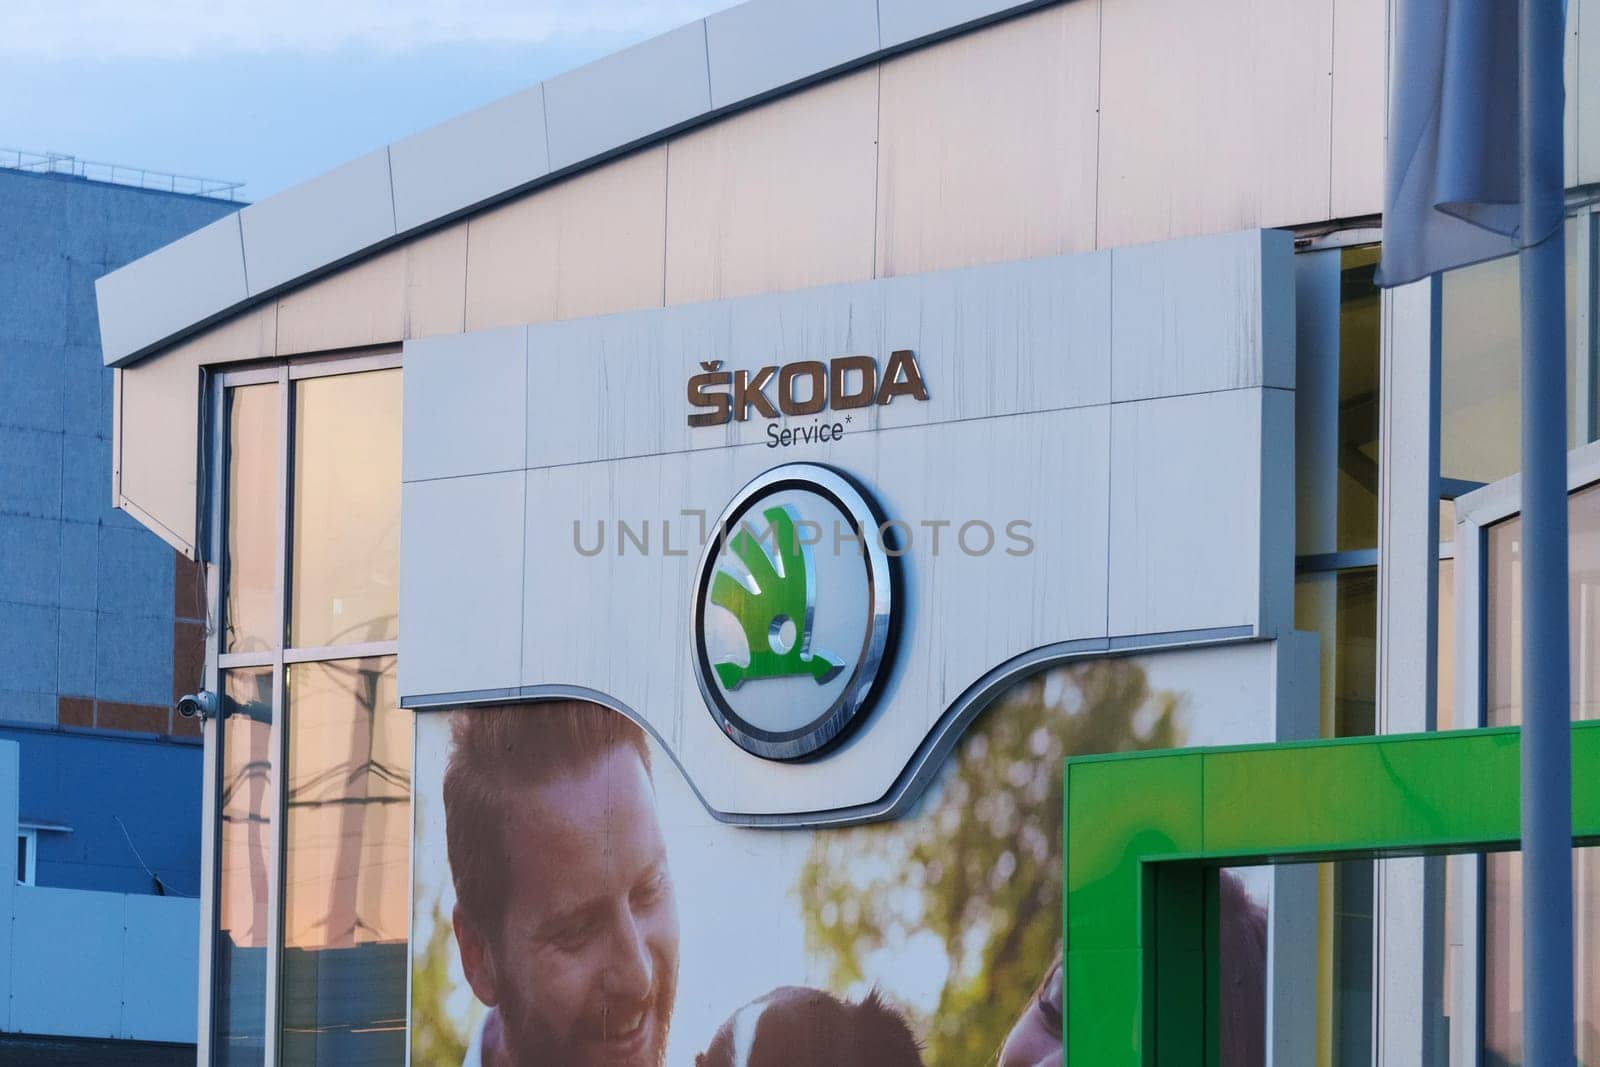 Tyumen, Russia-March 18, 2024: Skoda logo is displayed prominently in front of a commercial building, in Skoda vehicles. by darksoul72